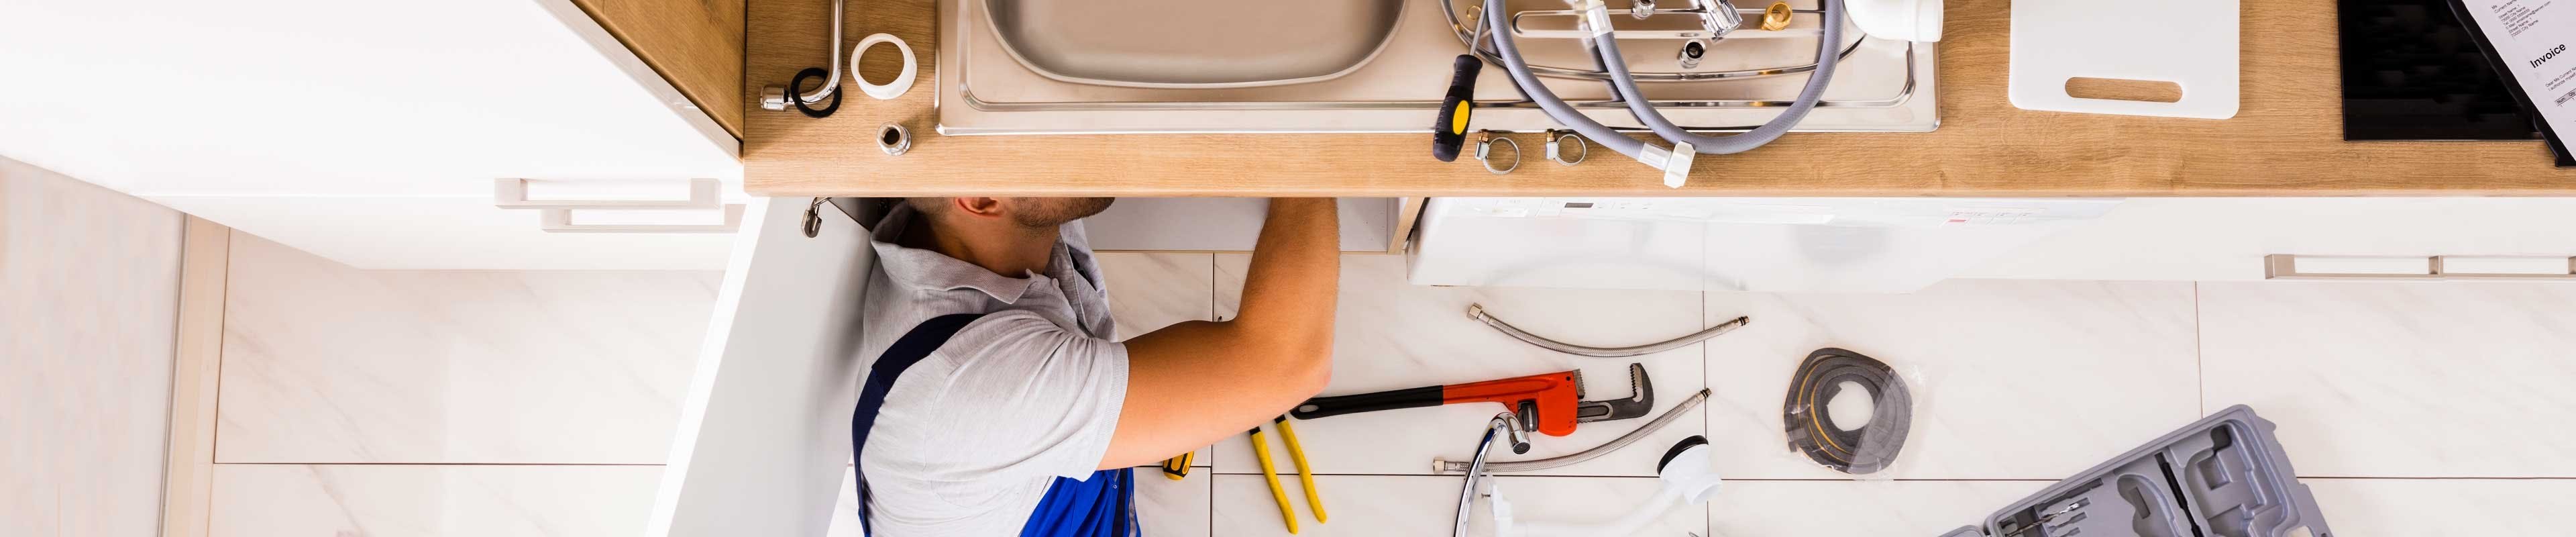 How to Check Your Plumbing